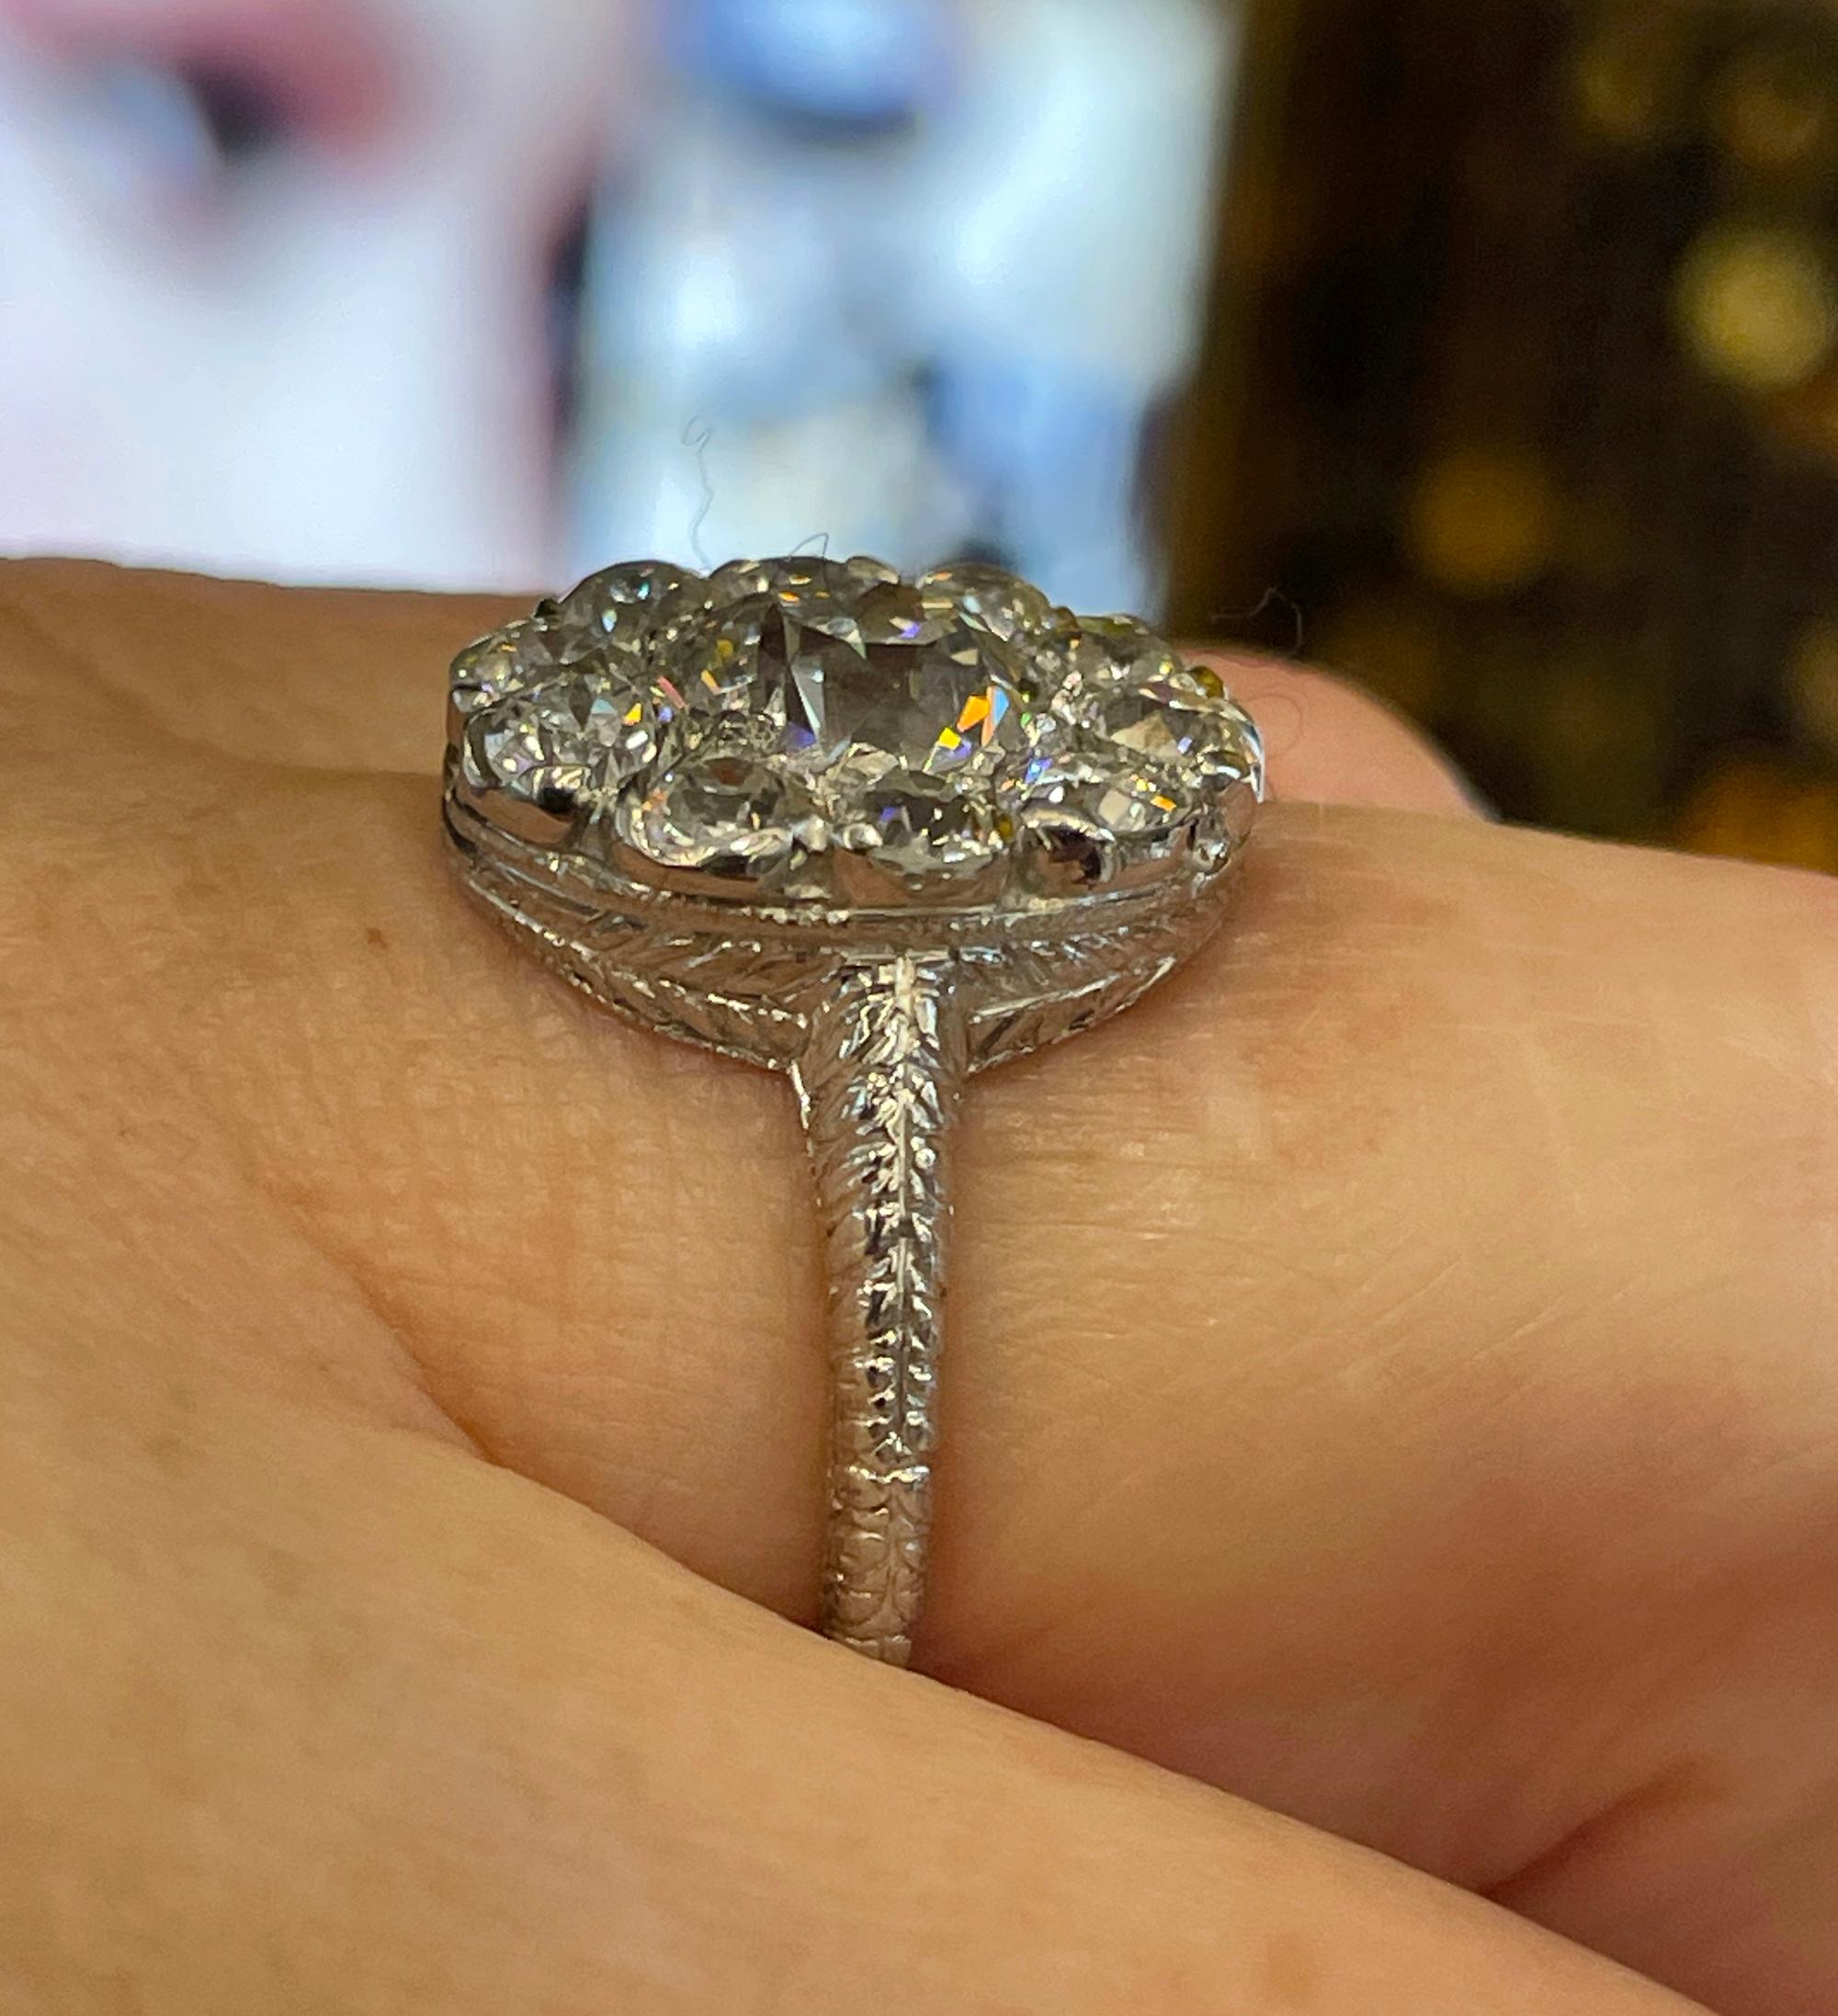 Antique Edwardian 1900s GIA H-VS2 3.38ctw OLD Euro Cut Diamond Cluster Plat Ring For Sale 10